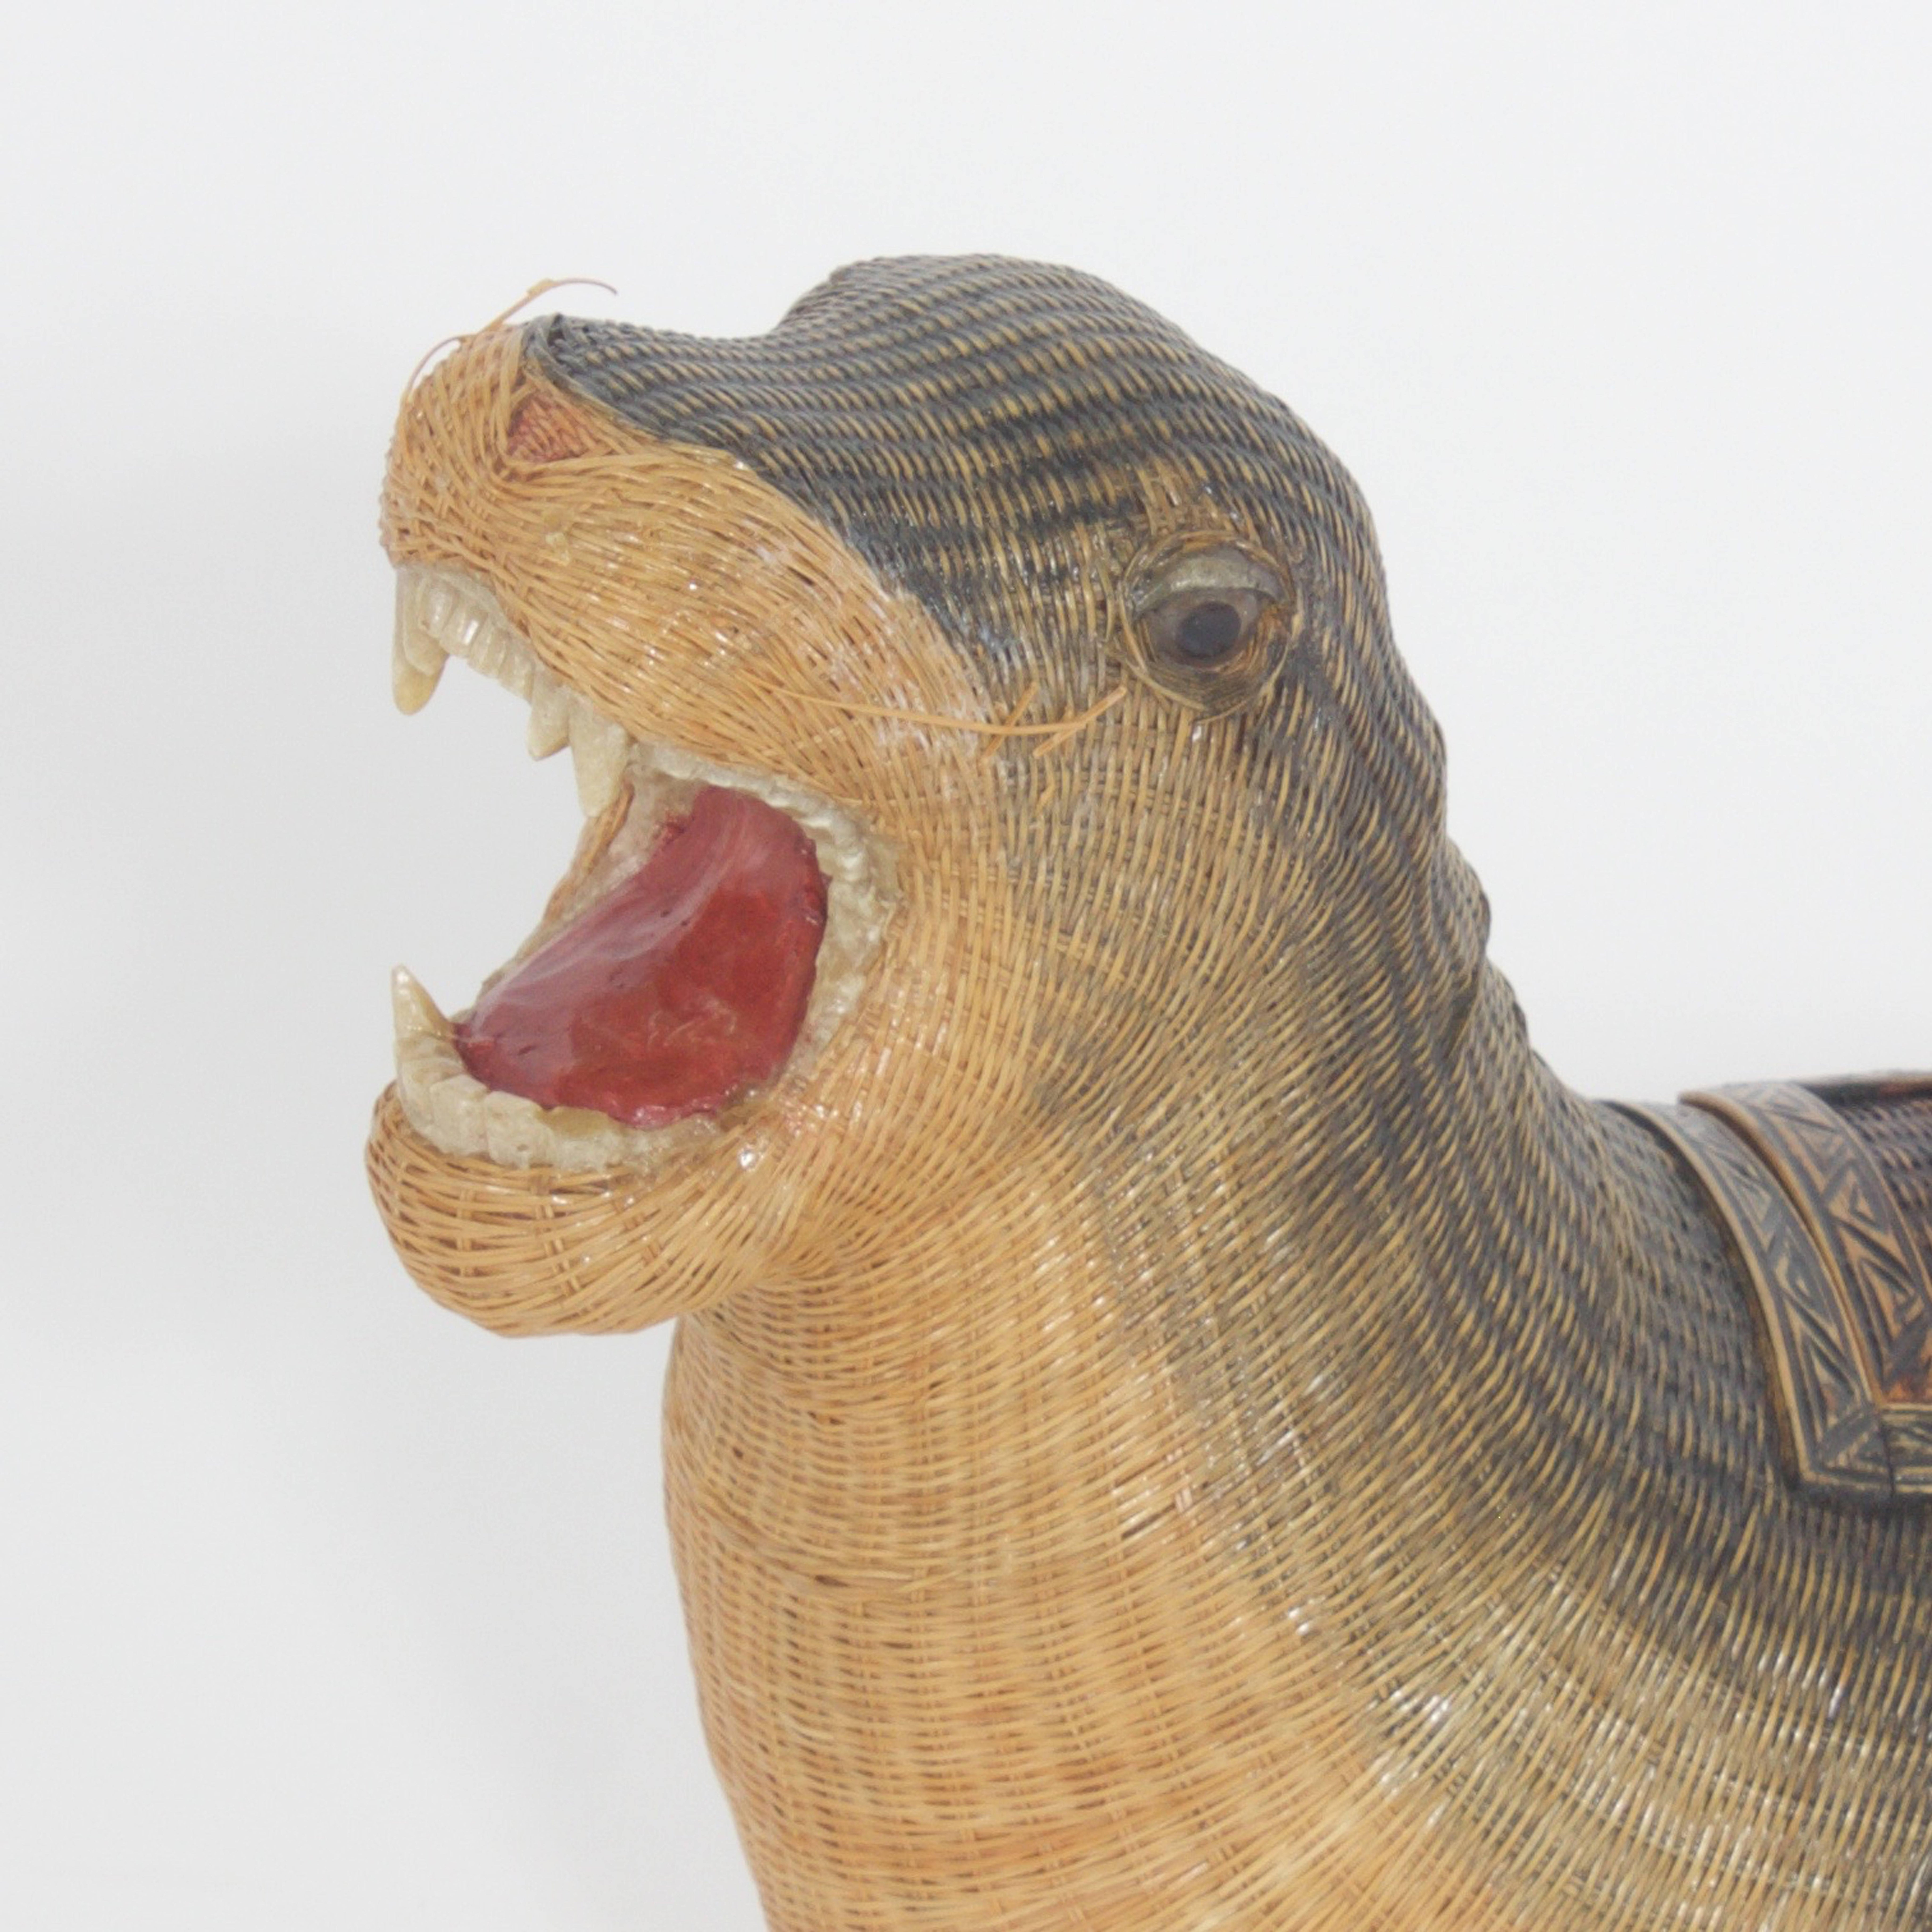 Mid Century Wicker Seal or Sea Lion with a tight and intricate woven construction. Having glass eyes and a carved wood removal lid that opens to reveal secret storage. This Seal bearing an aggressive expressions shows us why they are the Lions of